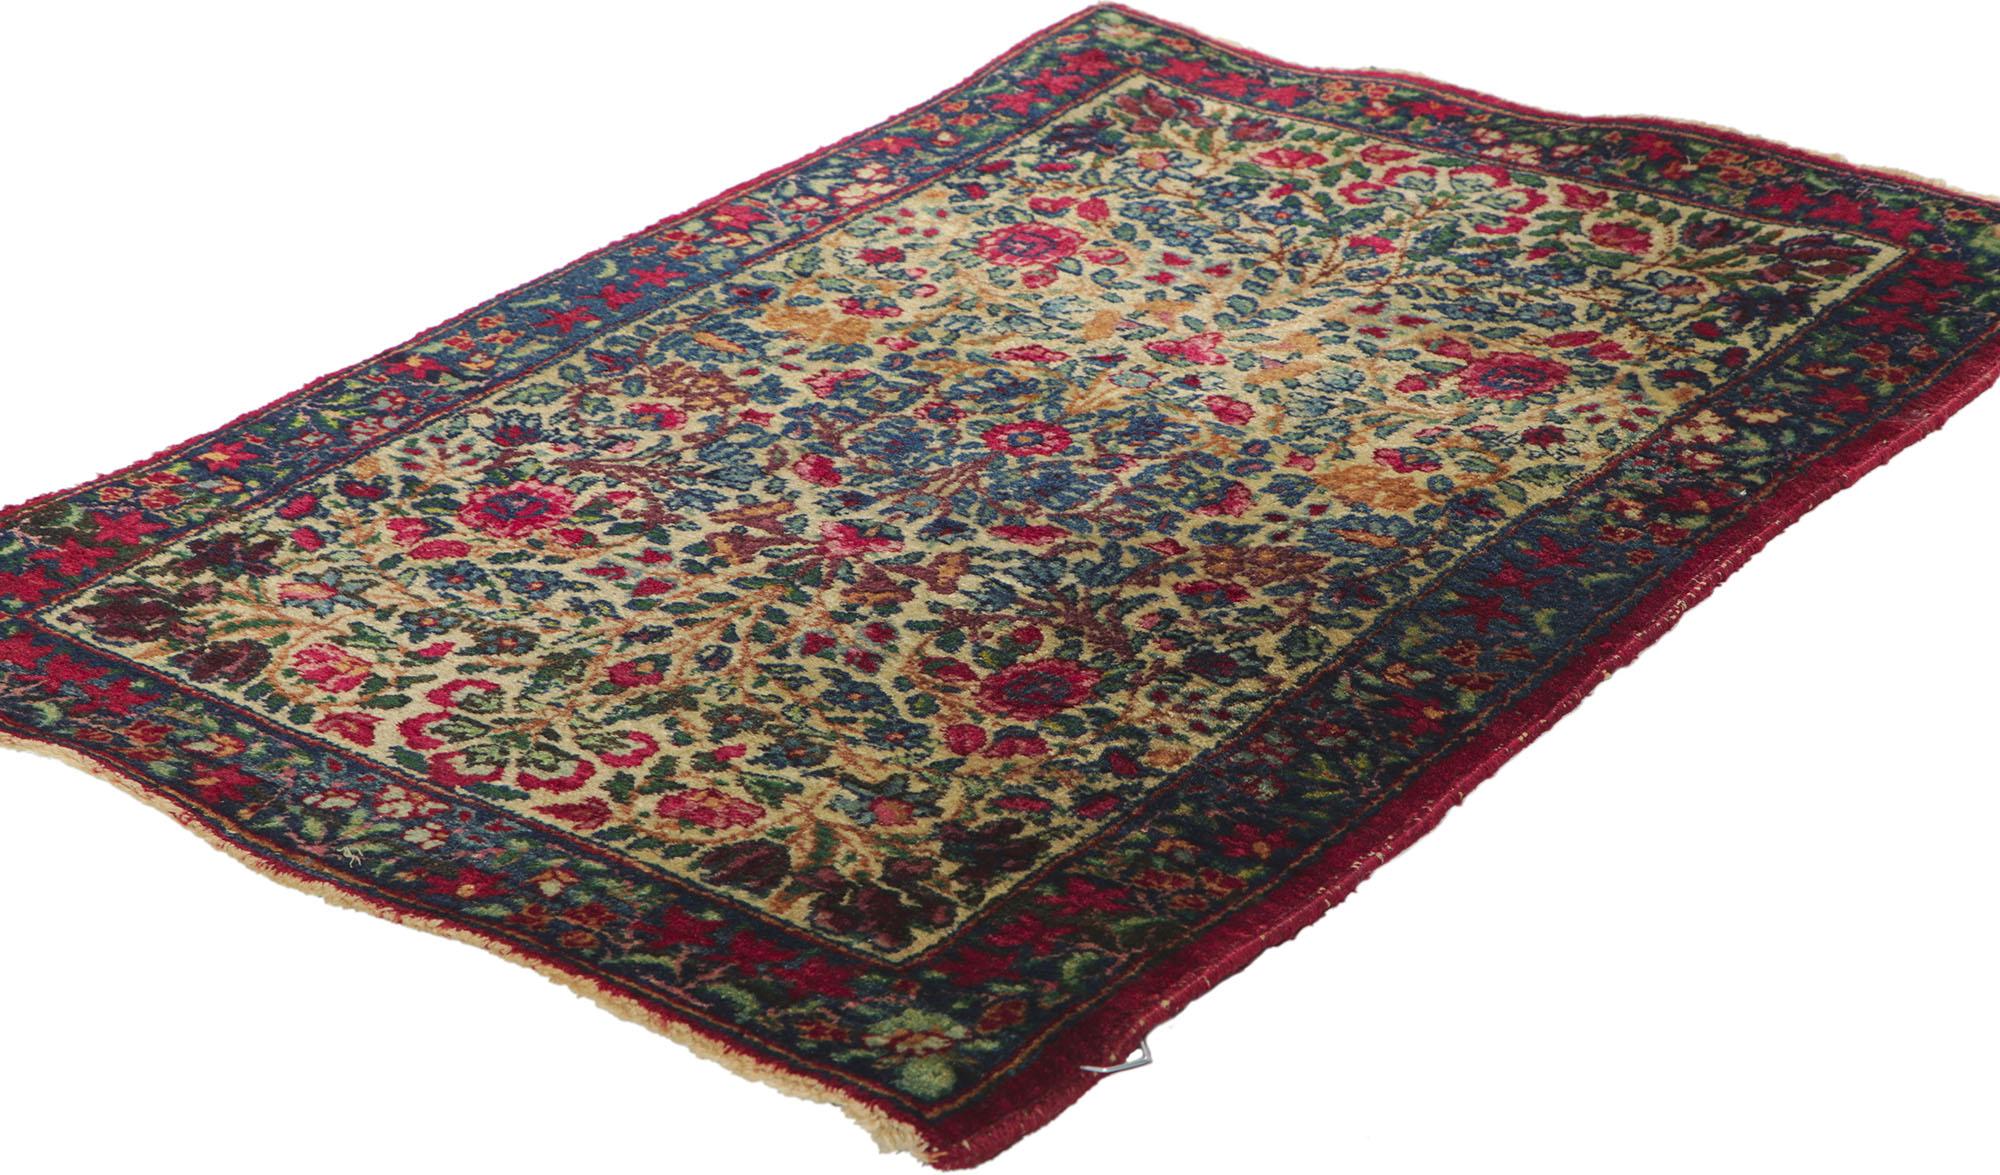 73228 Antique Persian Kerman Rug, 01'08 x 02'06. In this hand knotted wool antique Persian Kerman rug, ageless grace effortlessly intertwines with majestic opulence, forming a captivating visual spectacle. Set against a neutral canvas, the elaborate